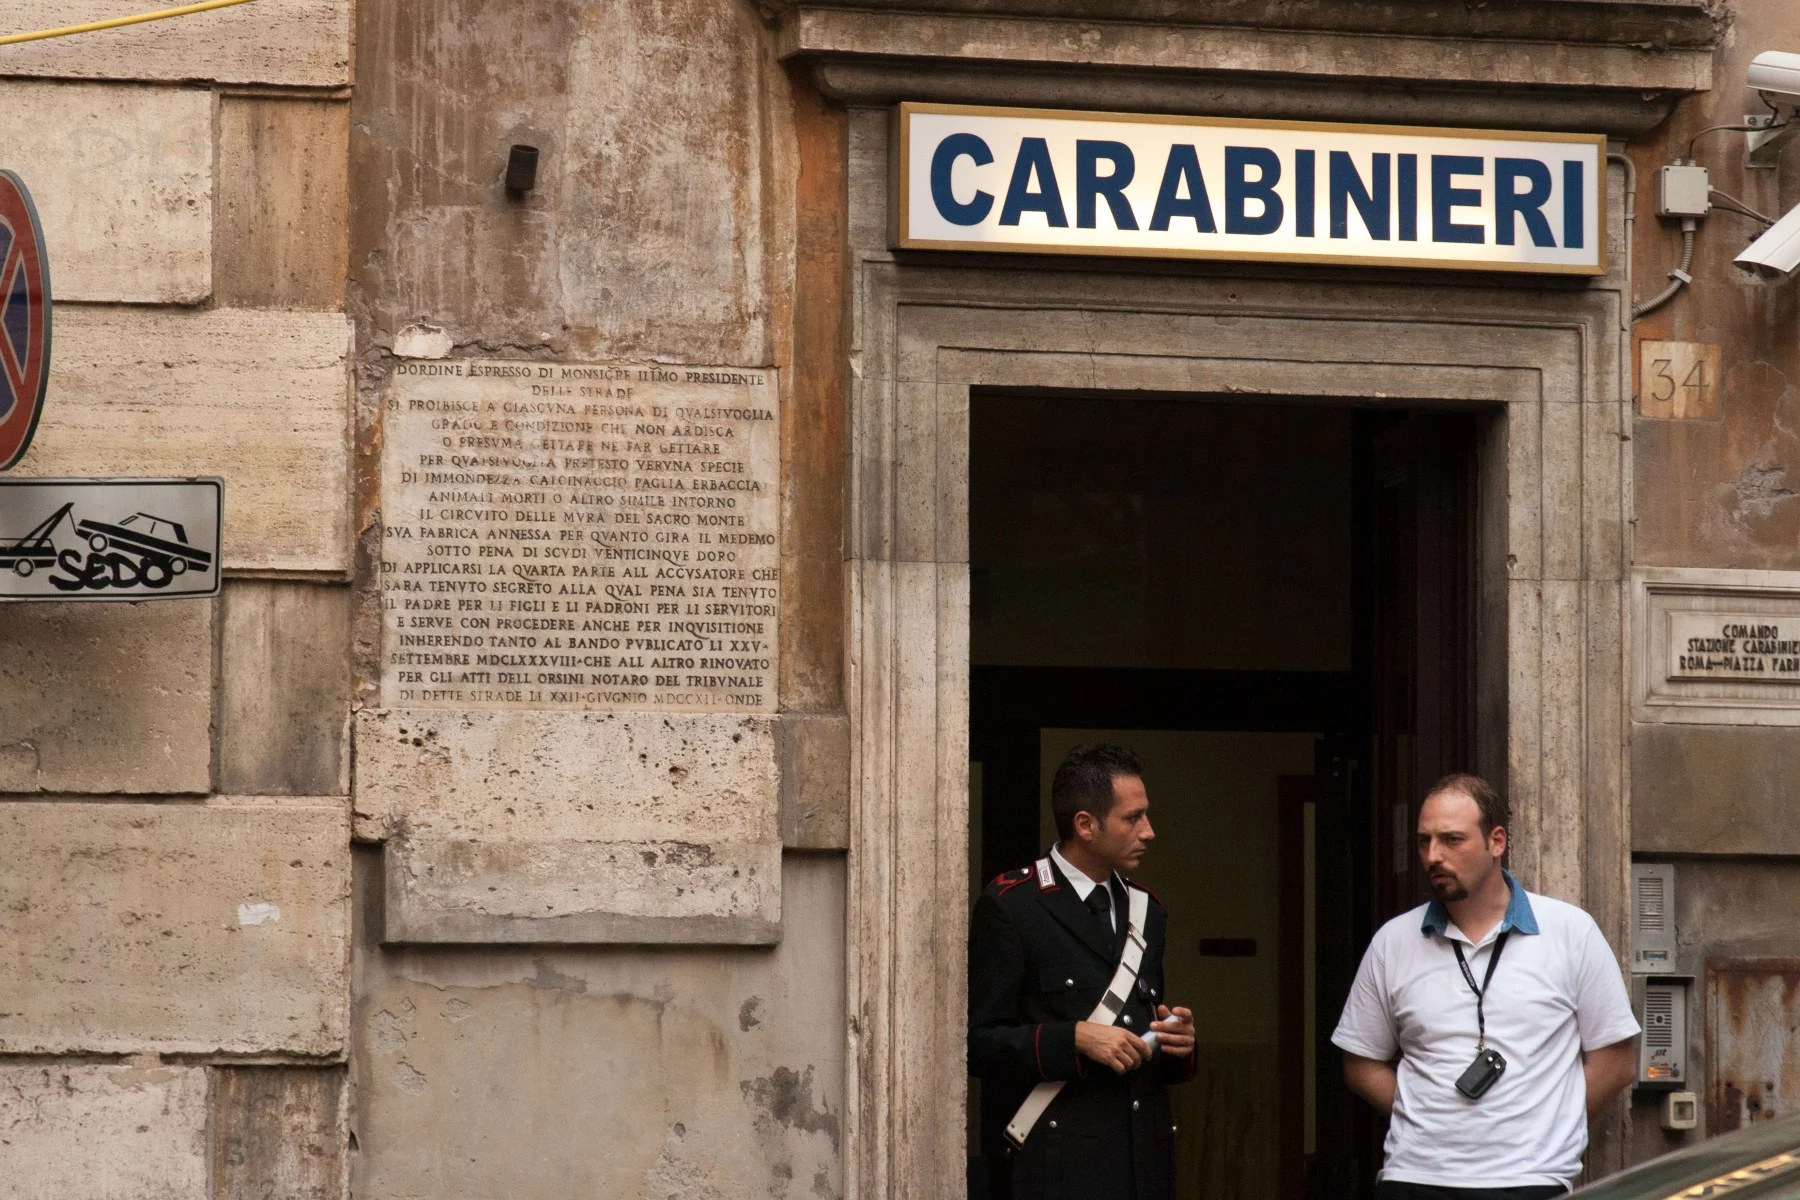 A police station in Rome, Italy, with a uniformed policeman in the doorway, talking to a man with a walkie-talkie.